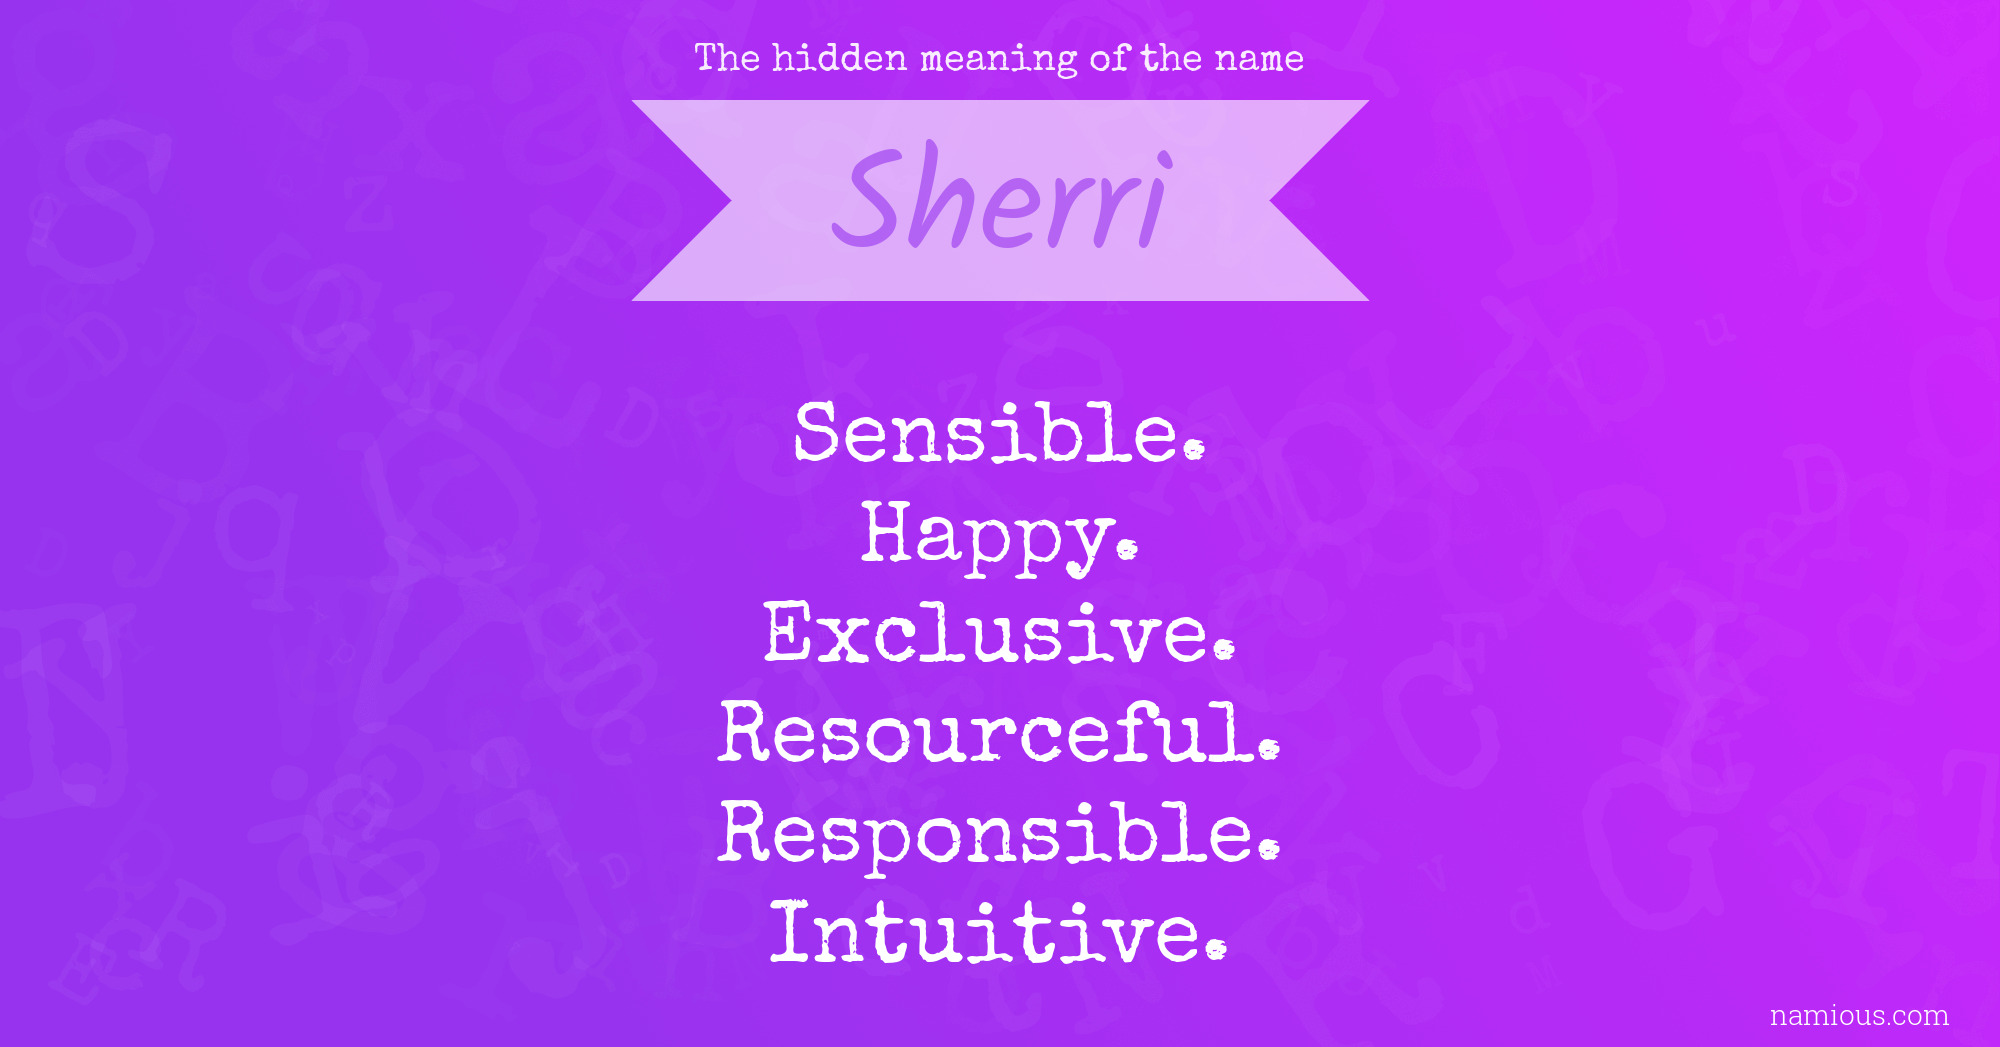 The hidden meaning of the name Sherri